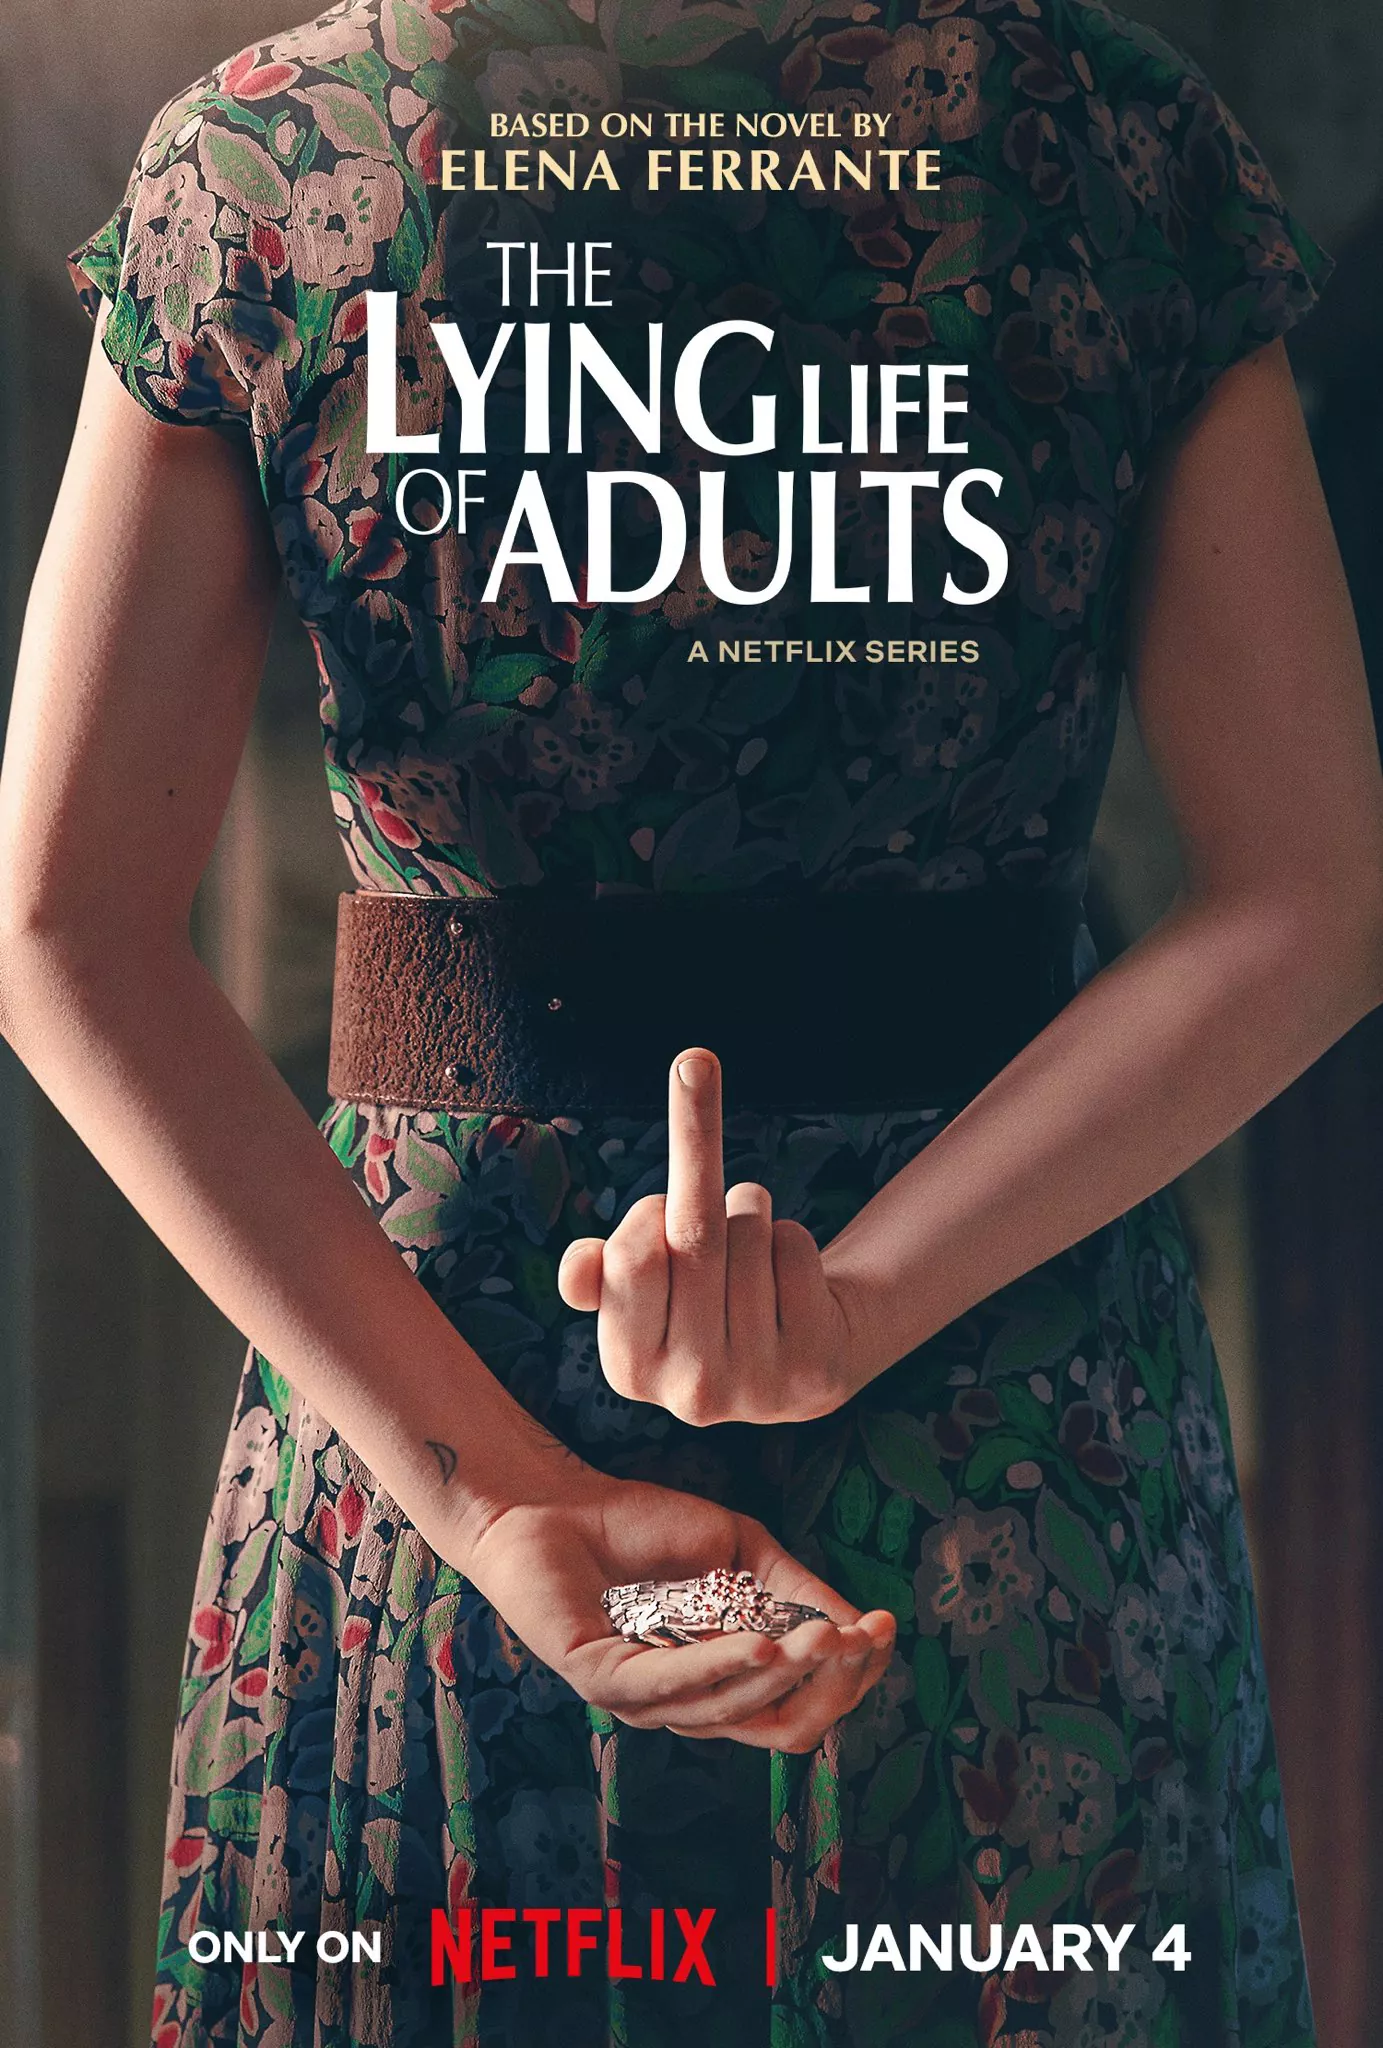 Trailer Από Τη Μίνι Σειρά "The Lying Life of Adults"